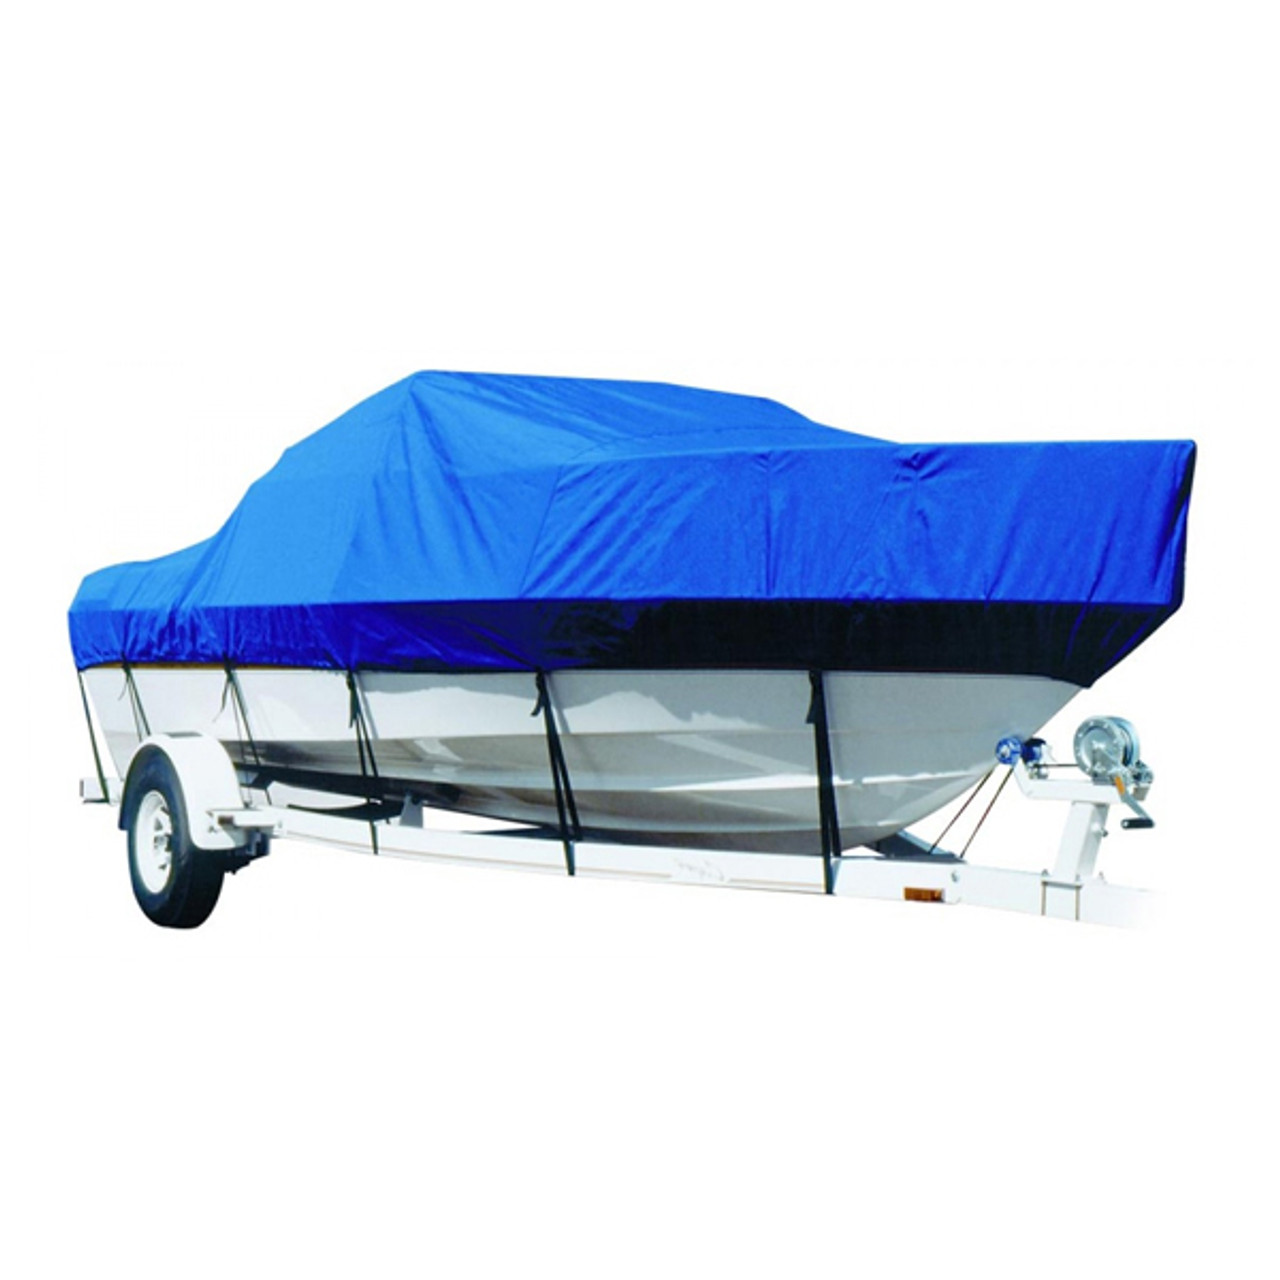 Trailerable Marine Tex Boat Cover for 16ft Lund Fishing Boat